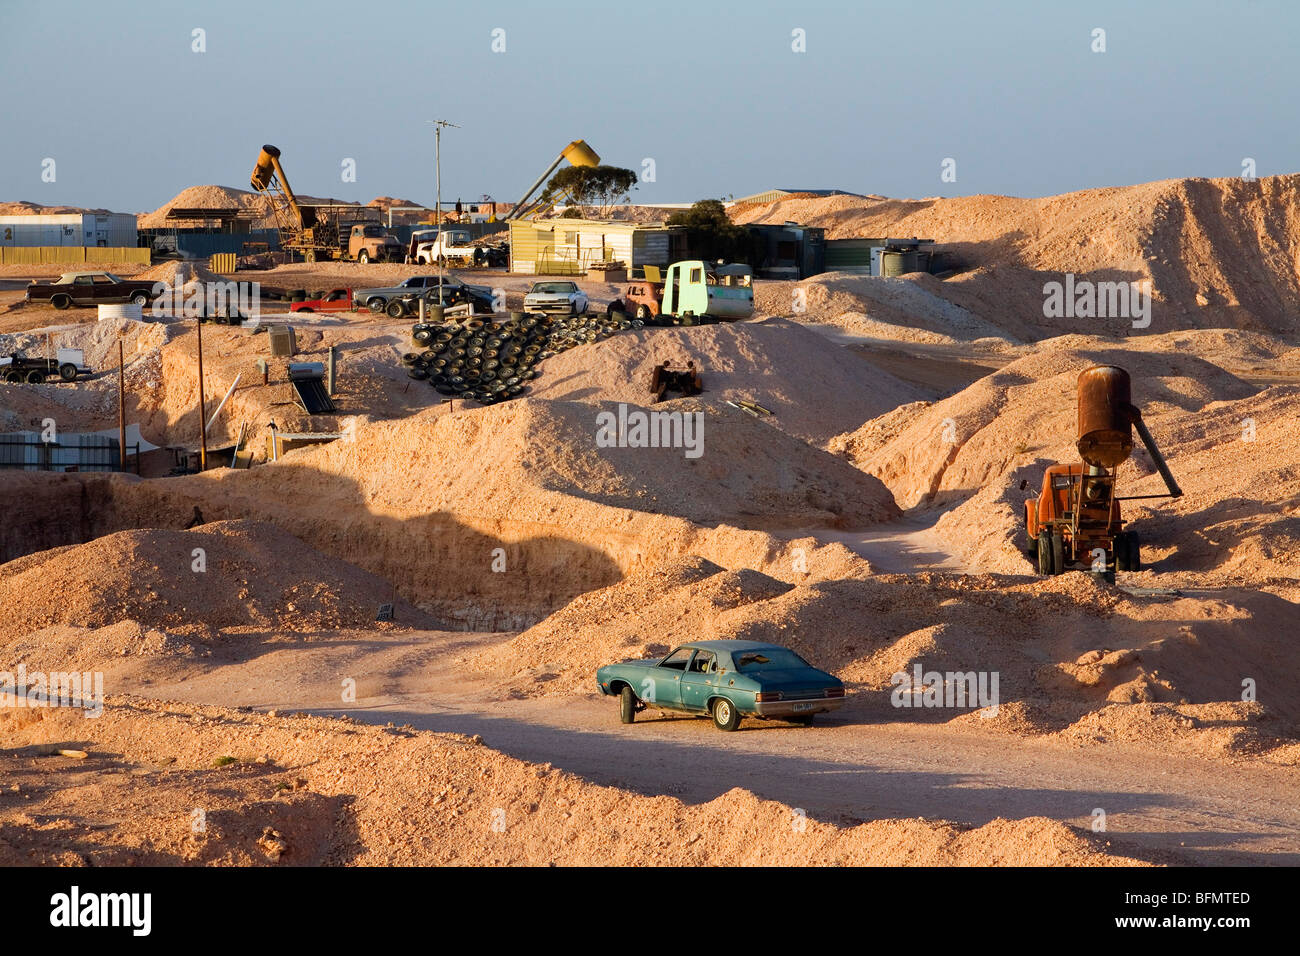 Australia, South Australia, Coober Pedy.   The lunar-like landscape of Coober Pedy - an outback town built mostly underground. Stock Photo